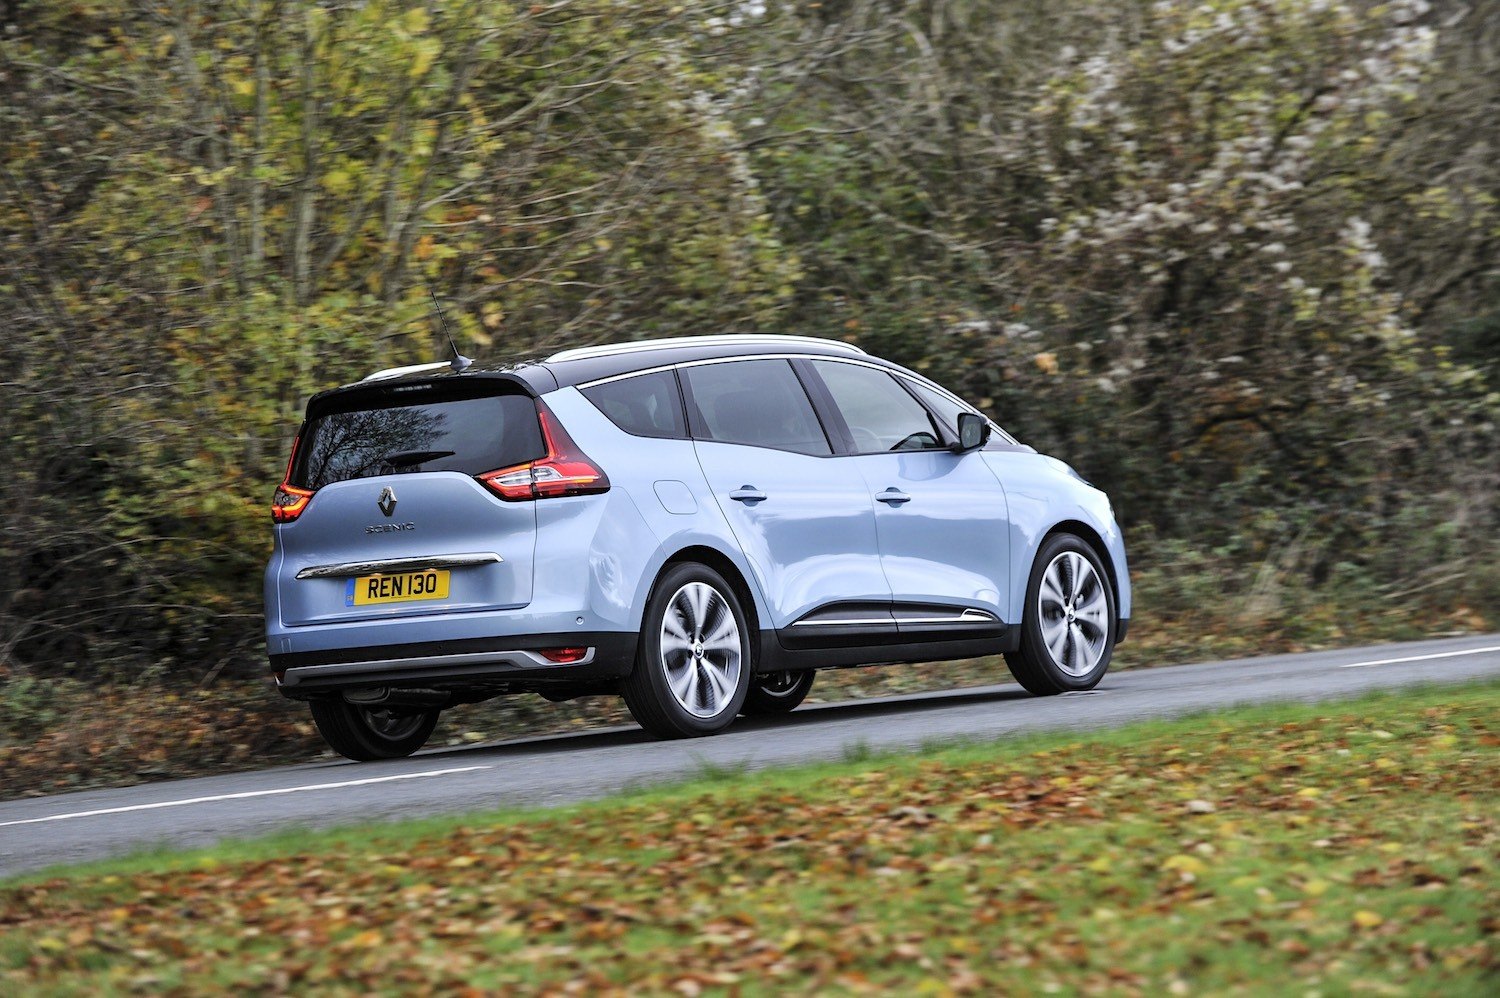 Neil Lyndon reviews the lates Renault Scenic for Drive 7